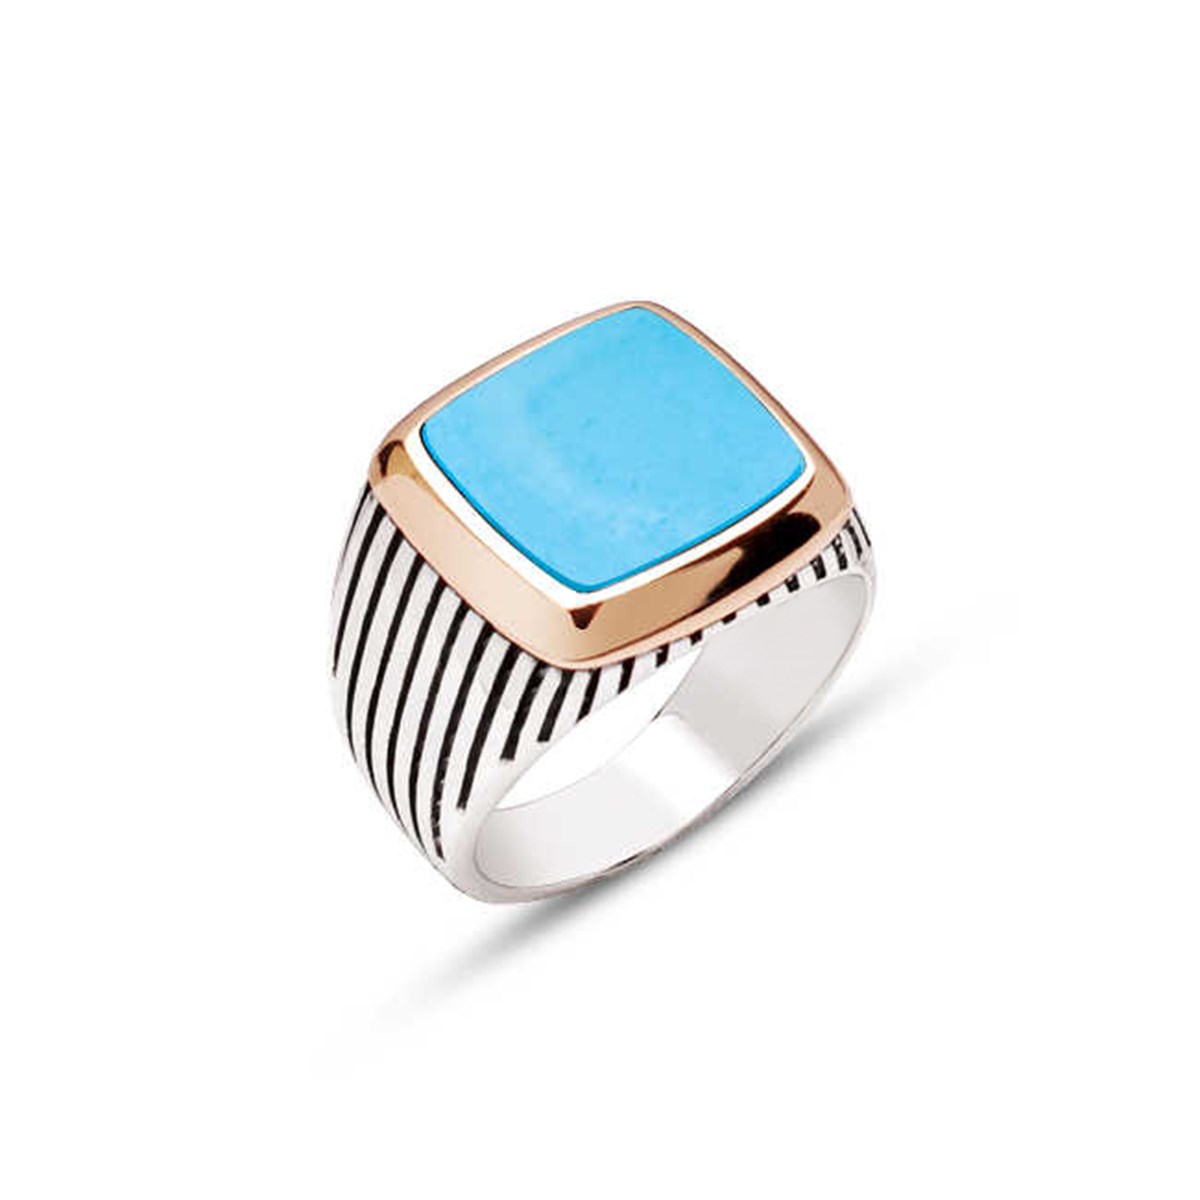 Sterling Silver Men's Ring with Turquoise Stone and Lined Case